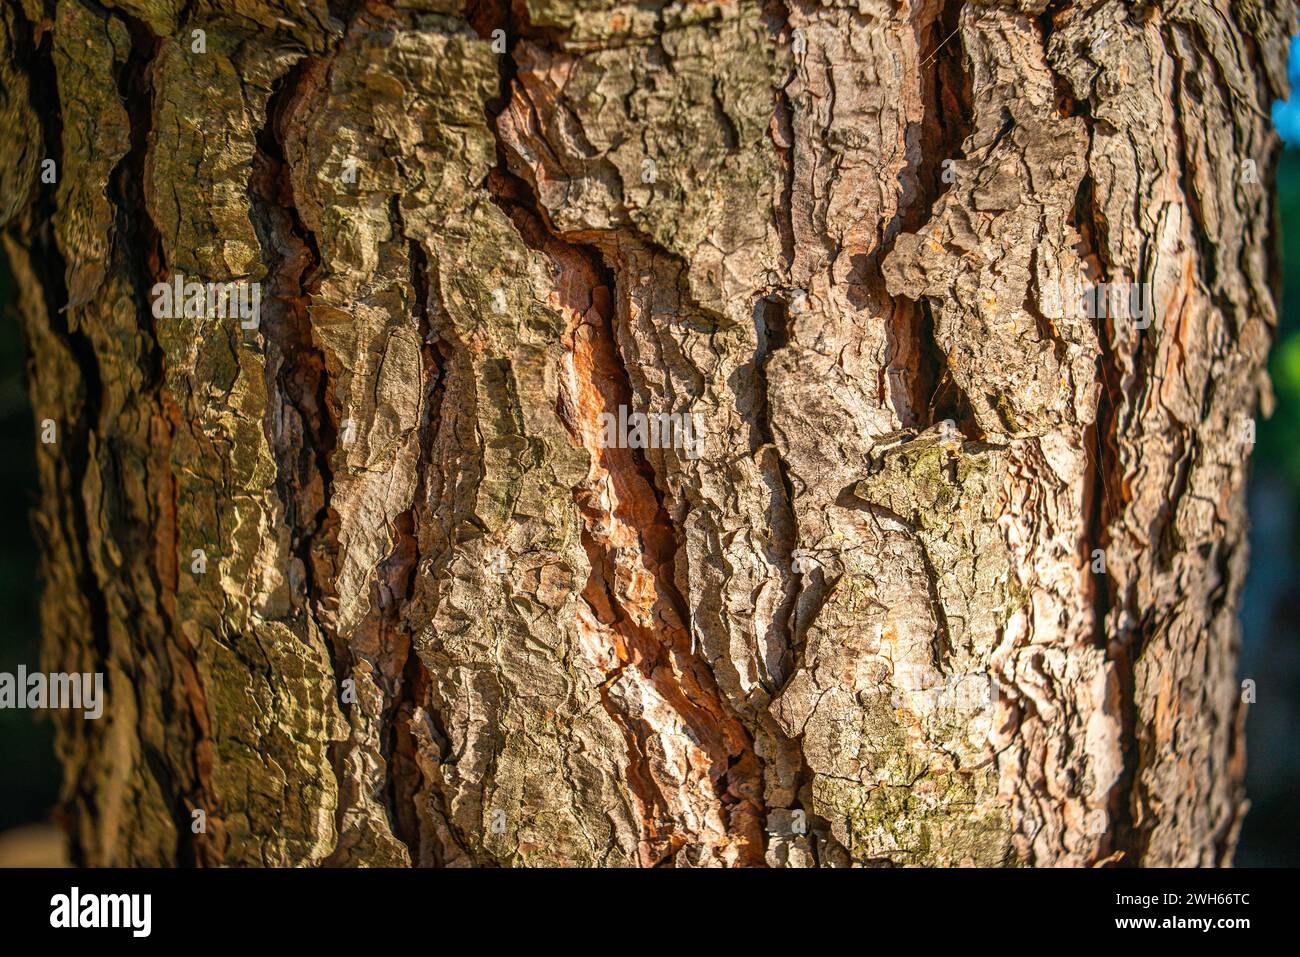 A close-up unveils the intricate texture and details of a tree trunk, showcasing the organic patterns and rough beauty of nature. Stock Photo